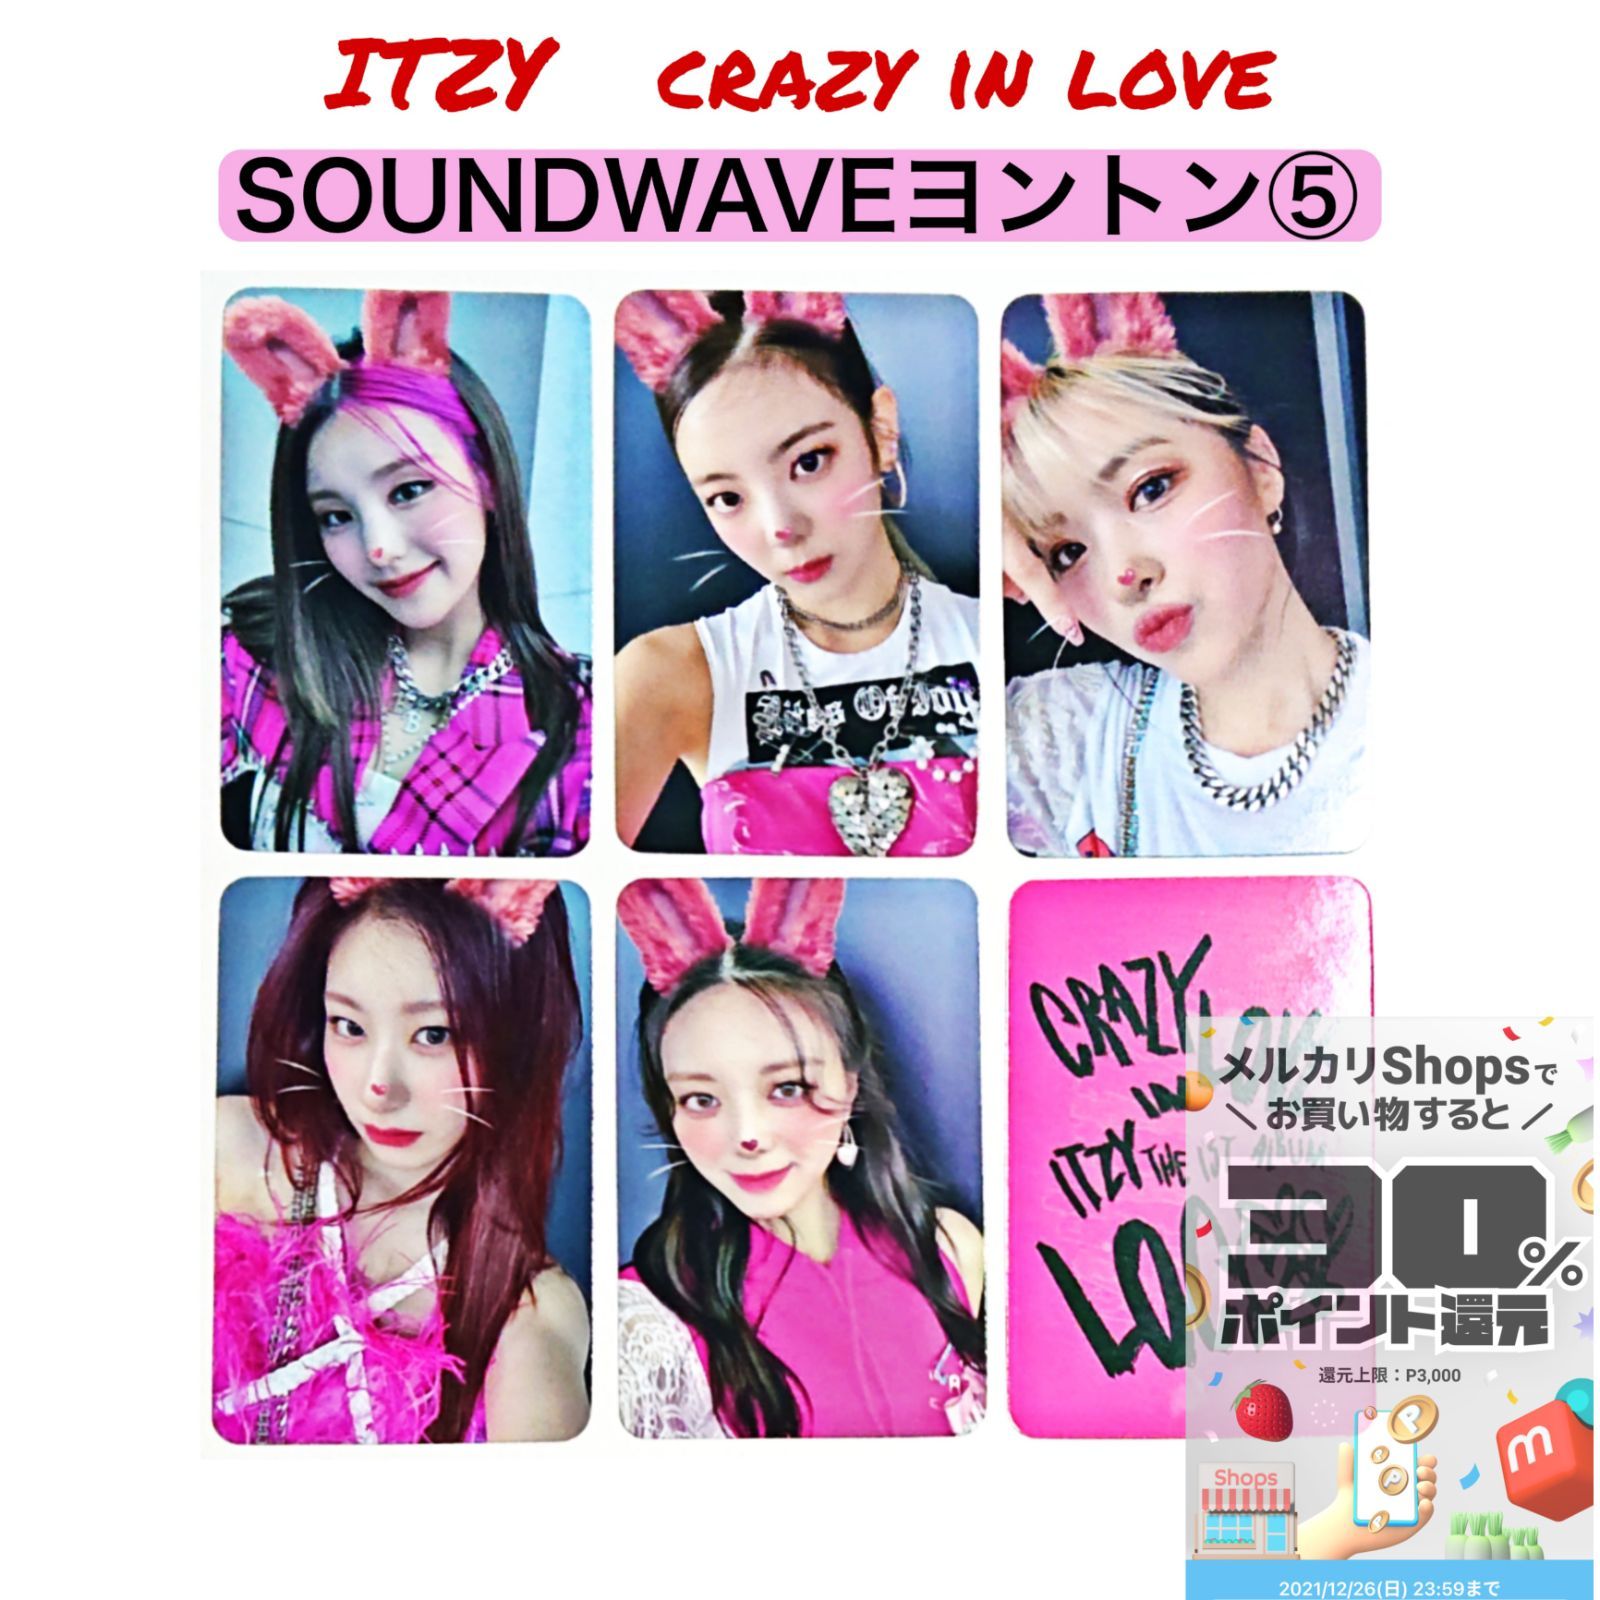 ITZY crazy in love soundwave チェリョン トレカ-